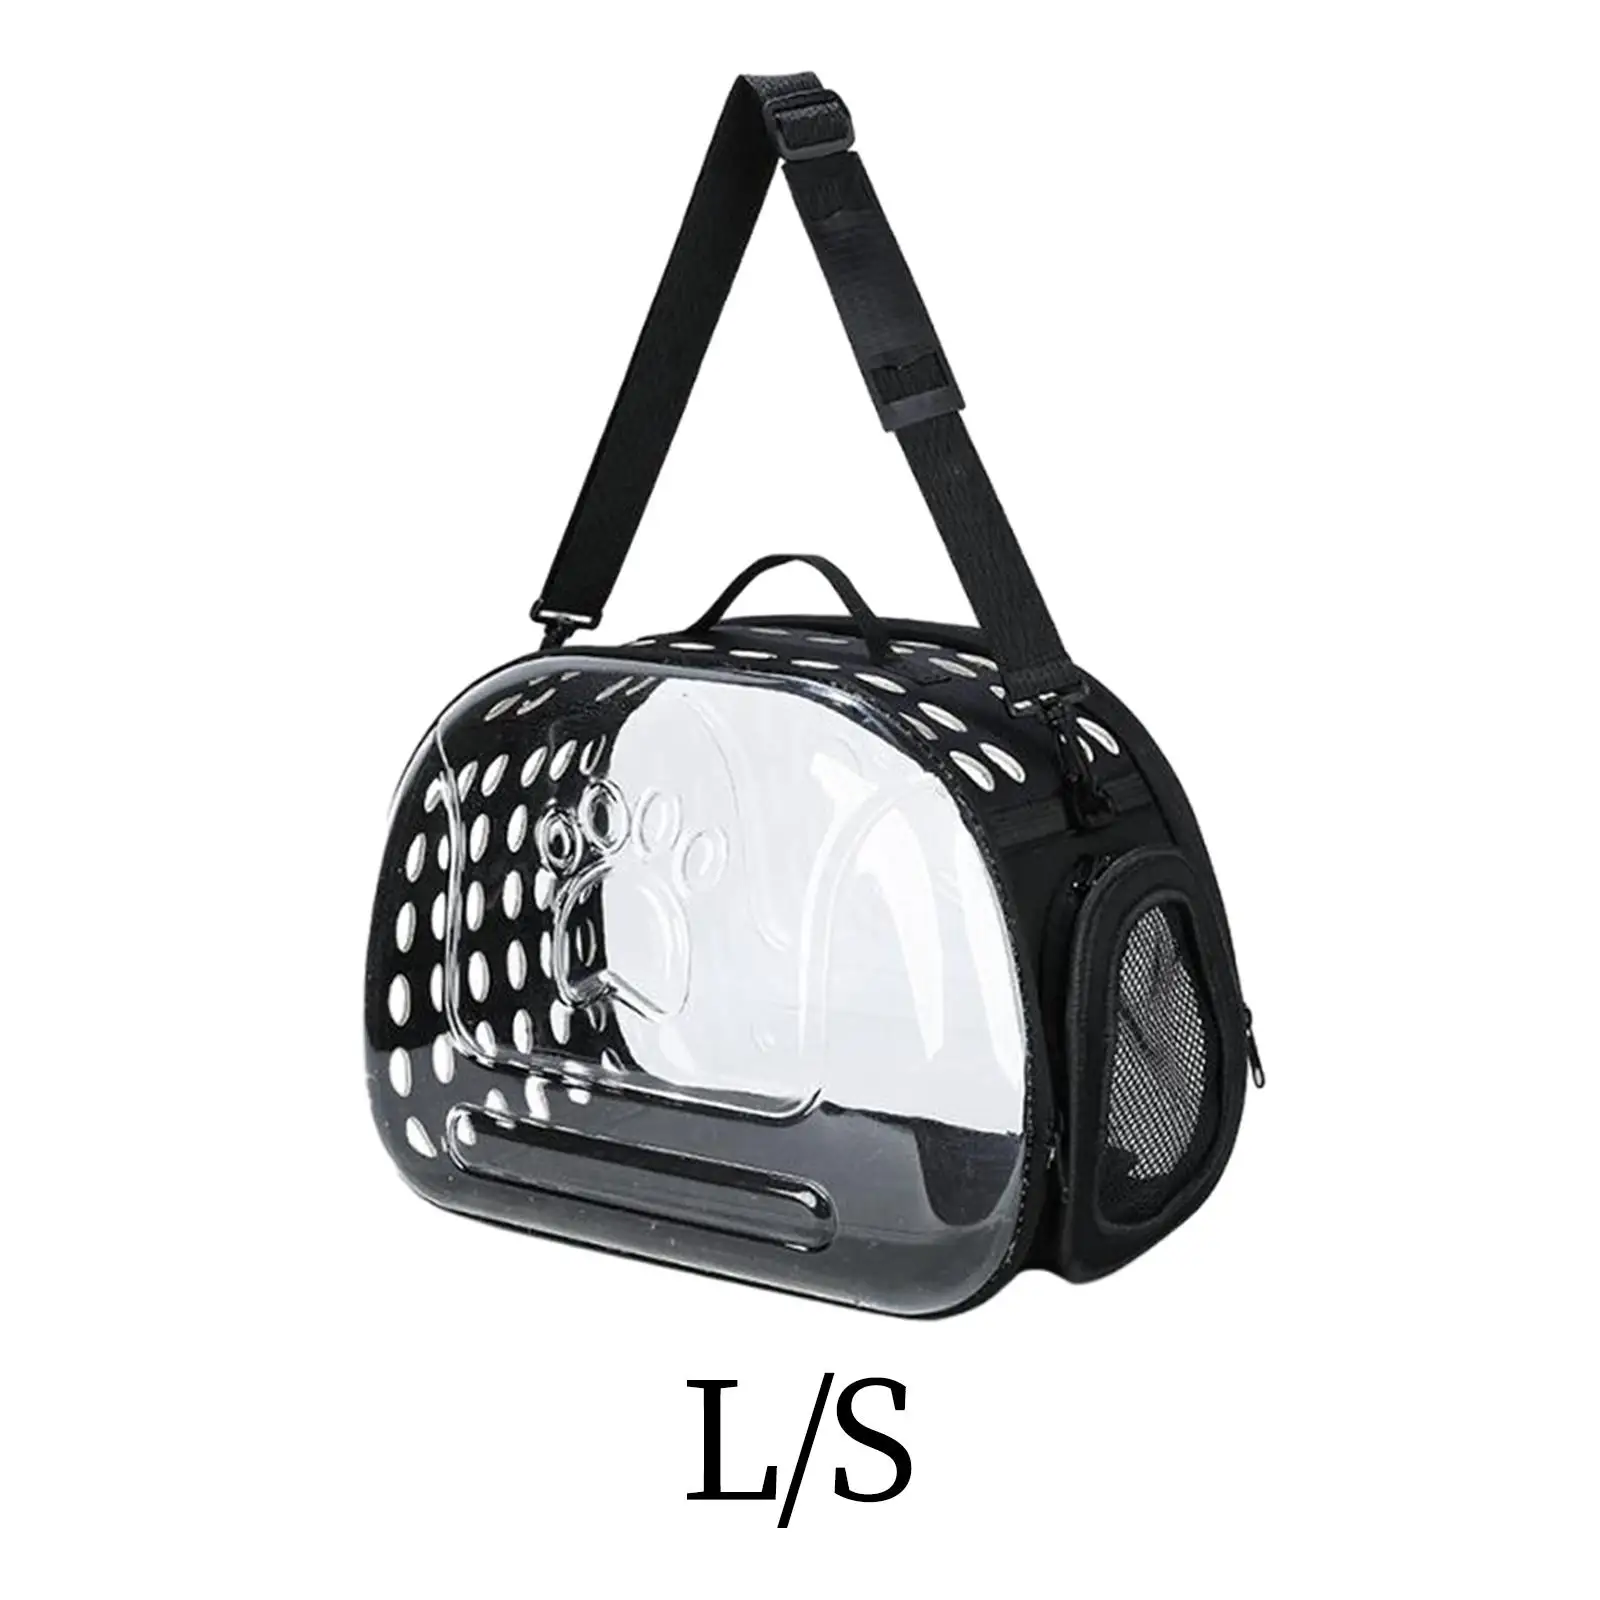 Transparent Cat Carrier Purse Tote Comfortable Travel Pet Bubble Backpack for Small Medium Dogs Kitten Hiking Travel Camping